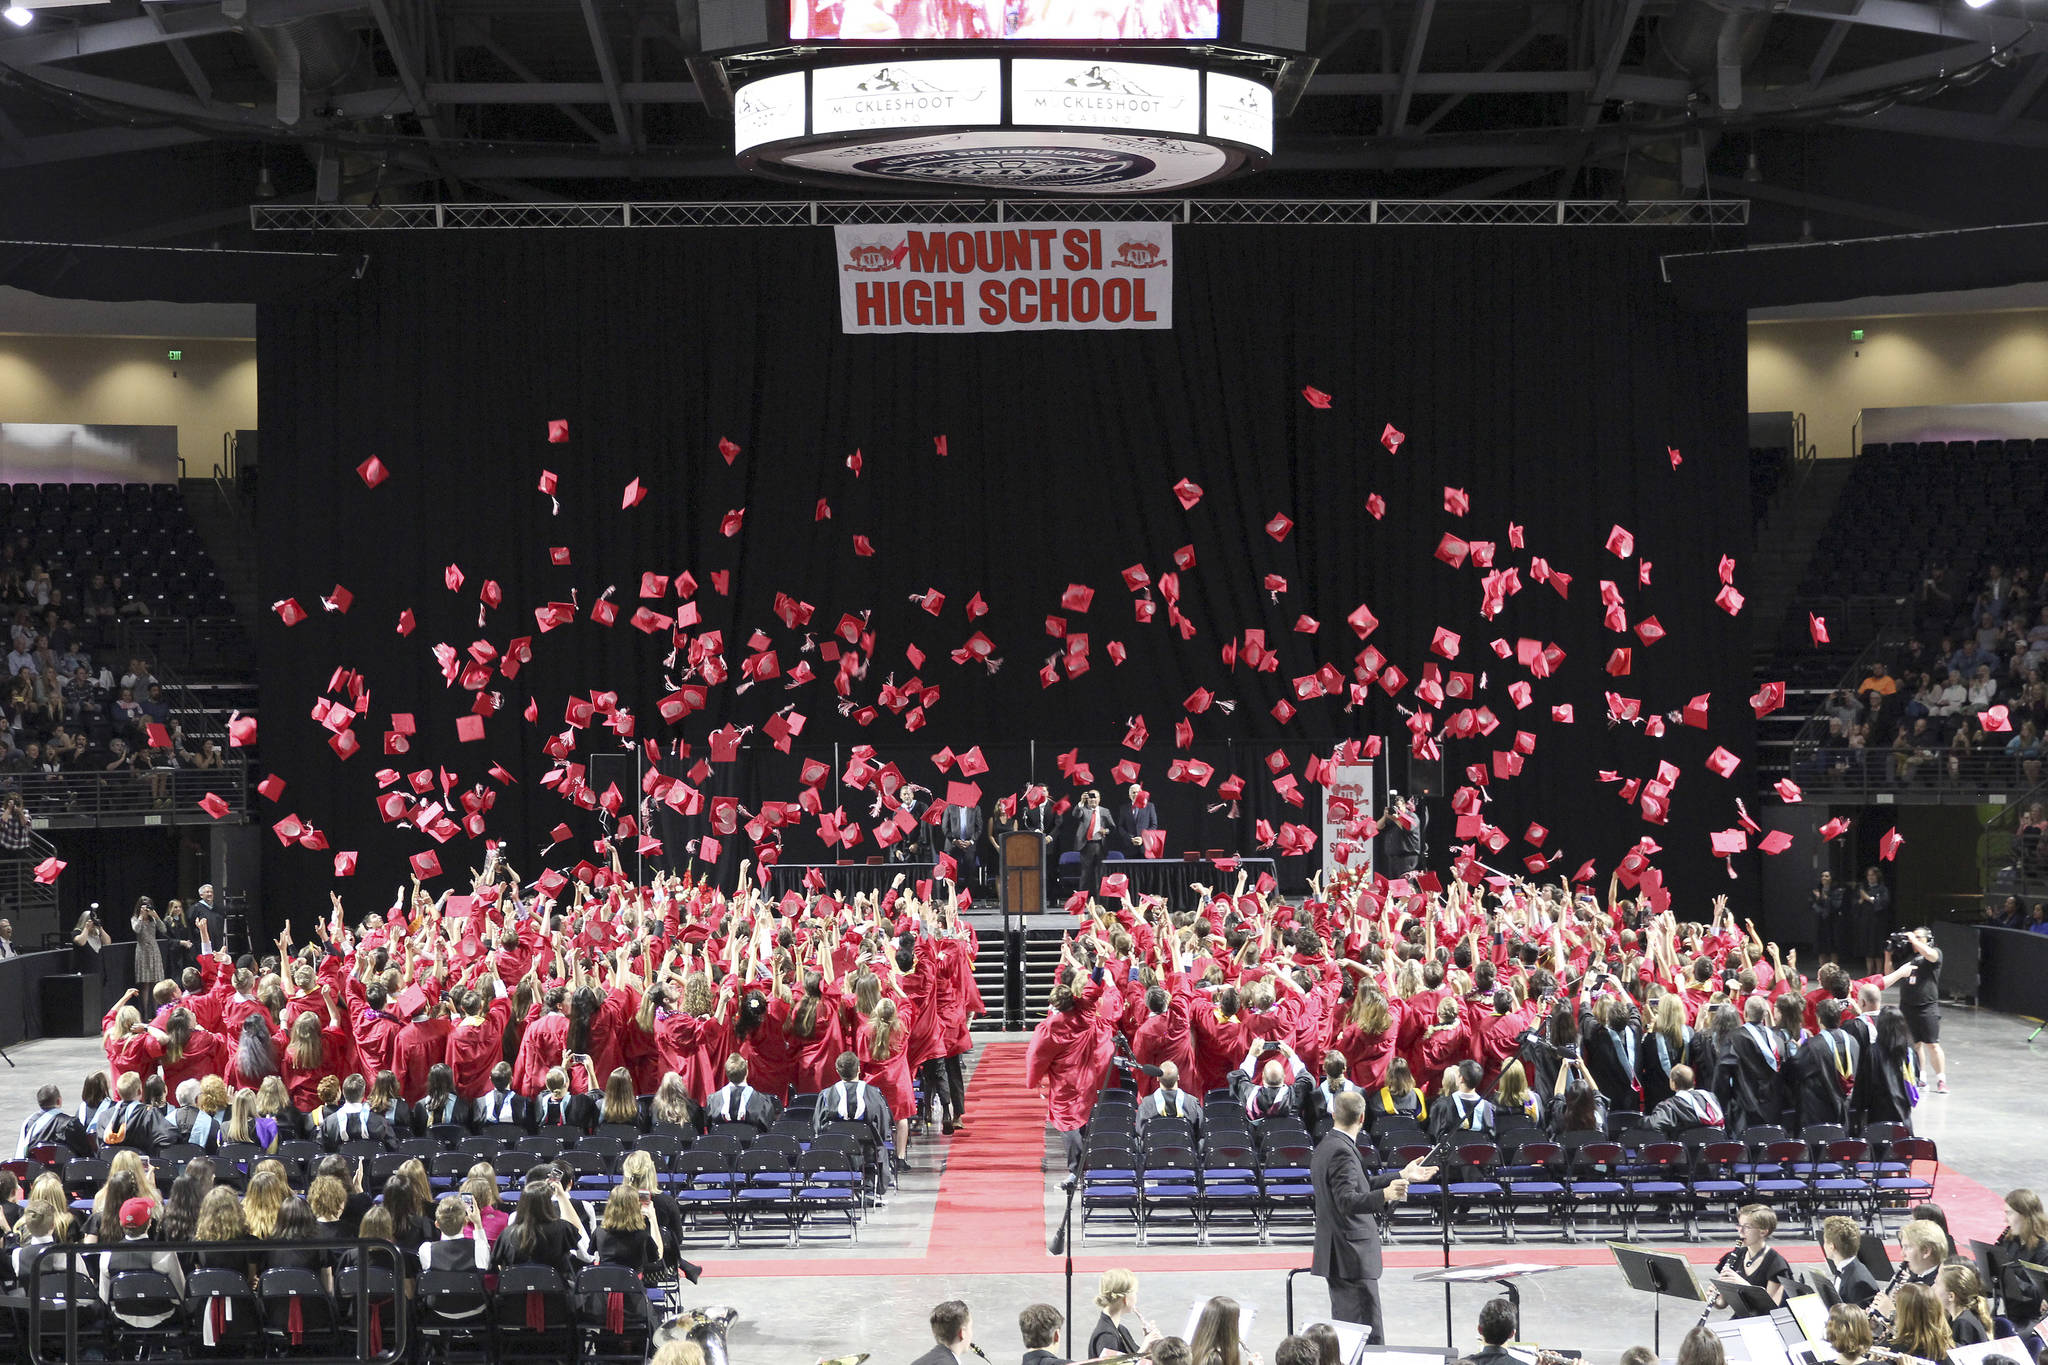 Mount Si High School students toss their hats after the graduation ceremony. Photo courtesy of Mount Si High School